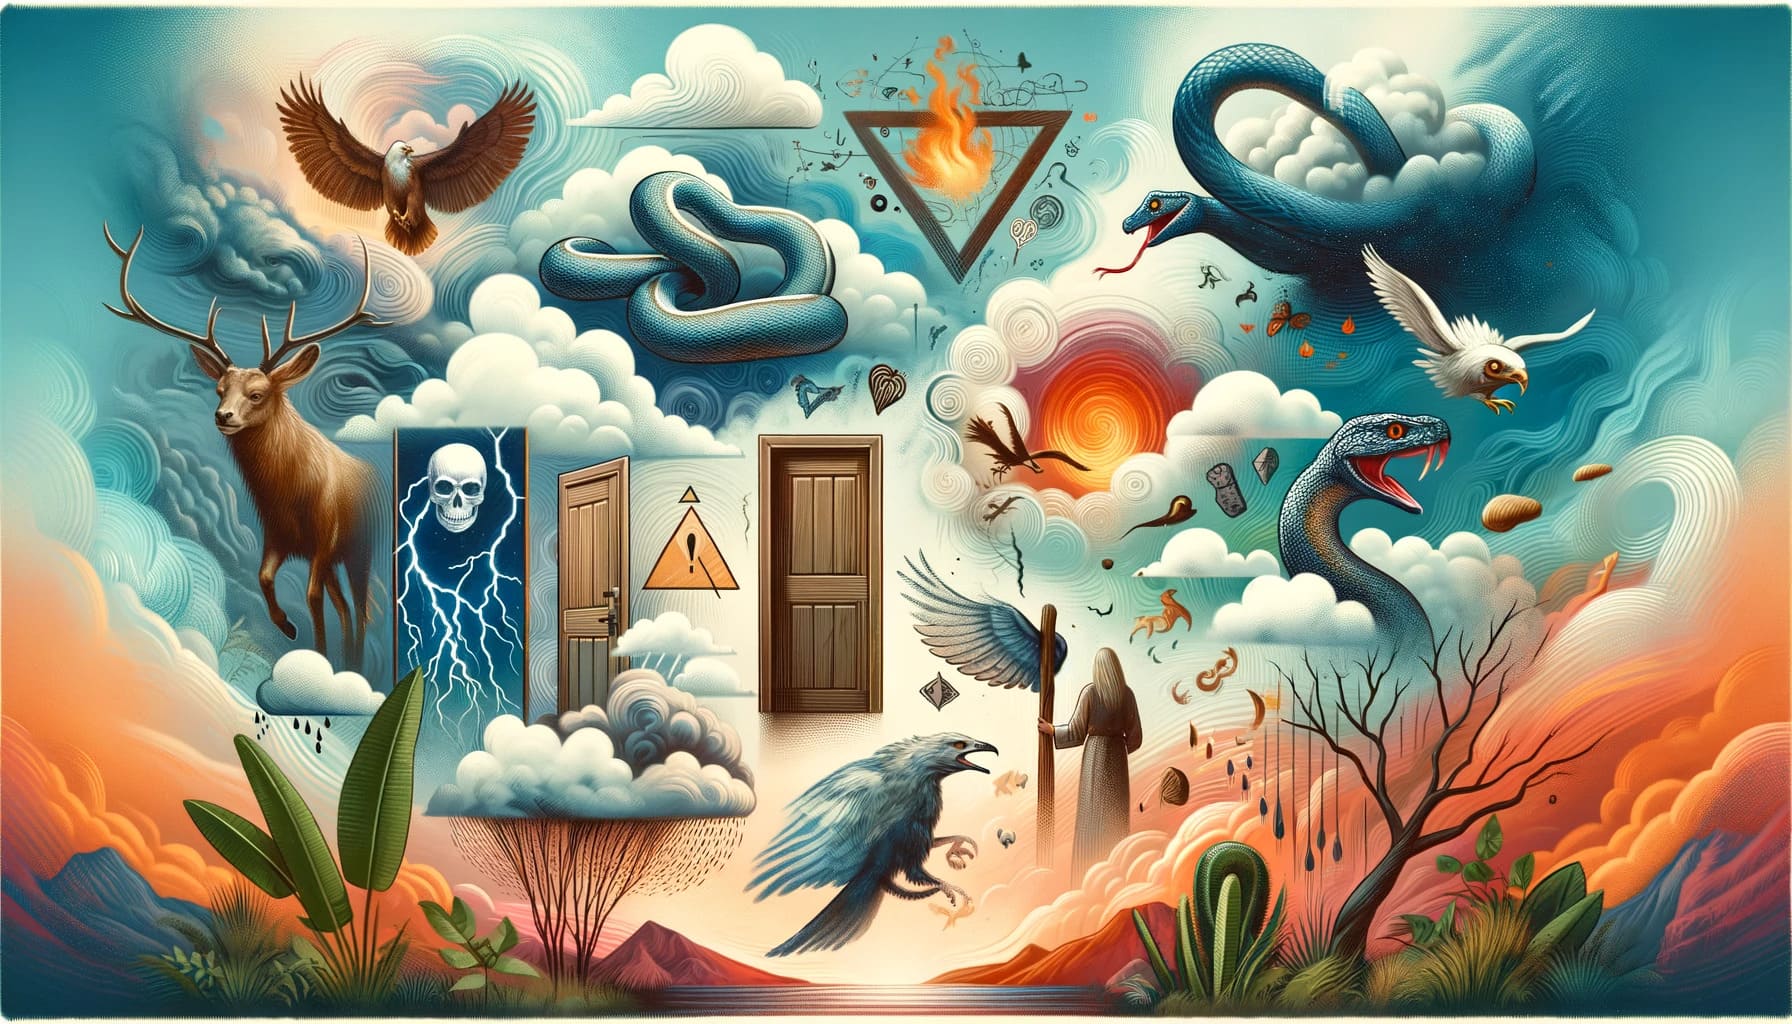 Collage of symbolic elements in dreams